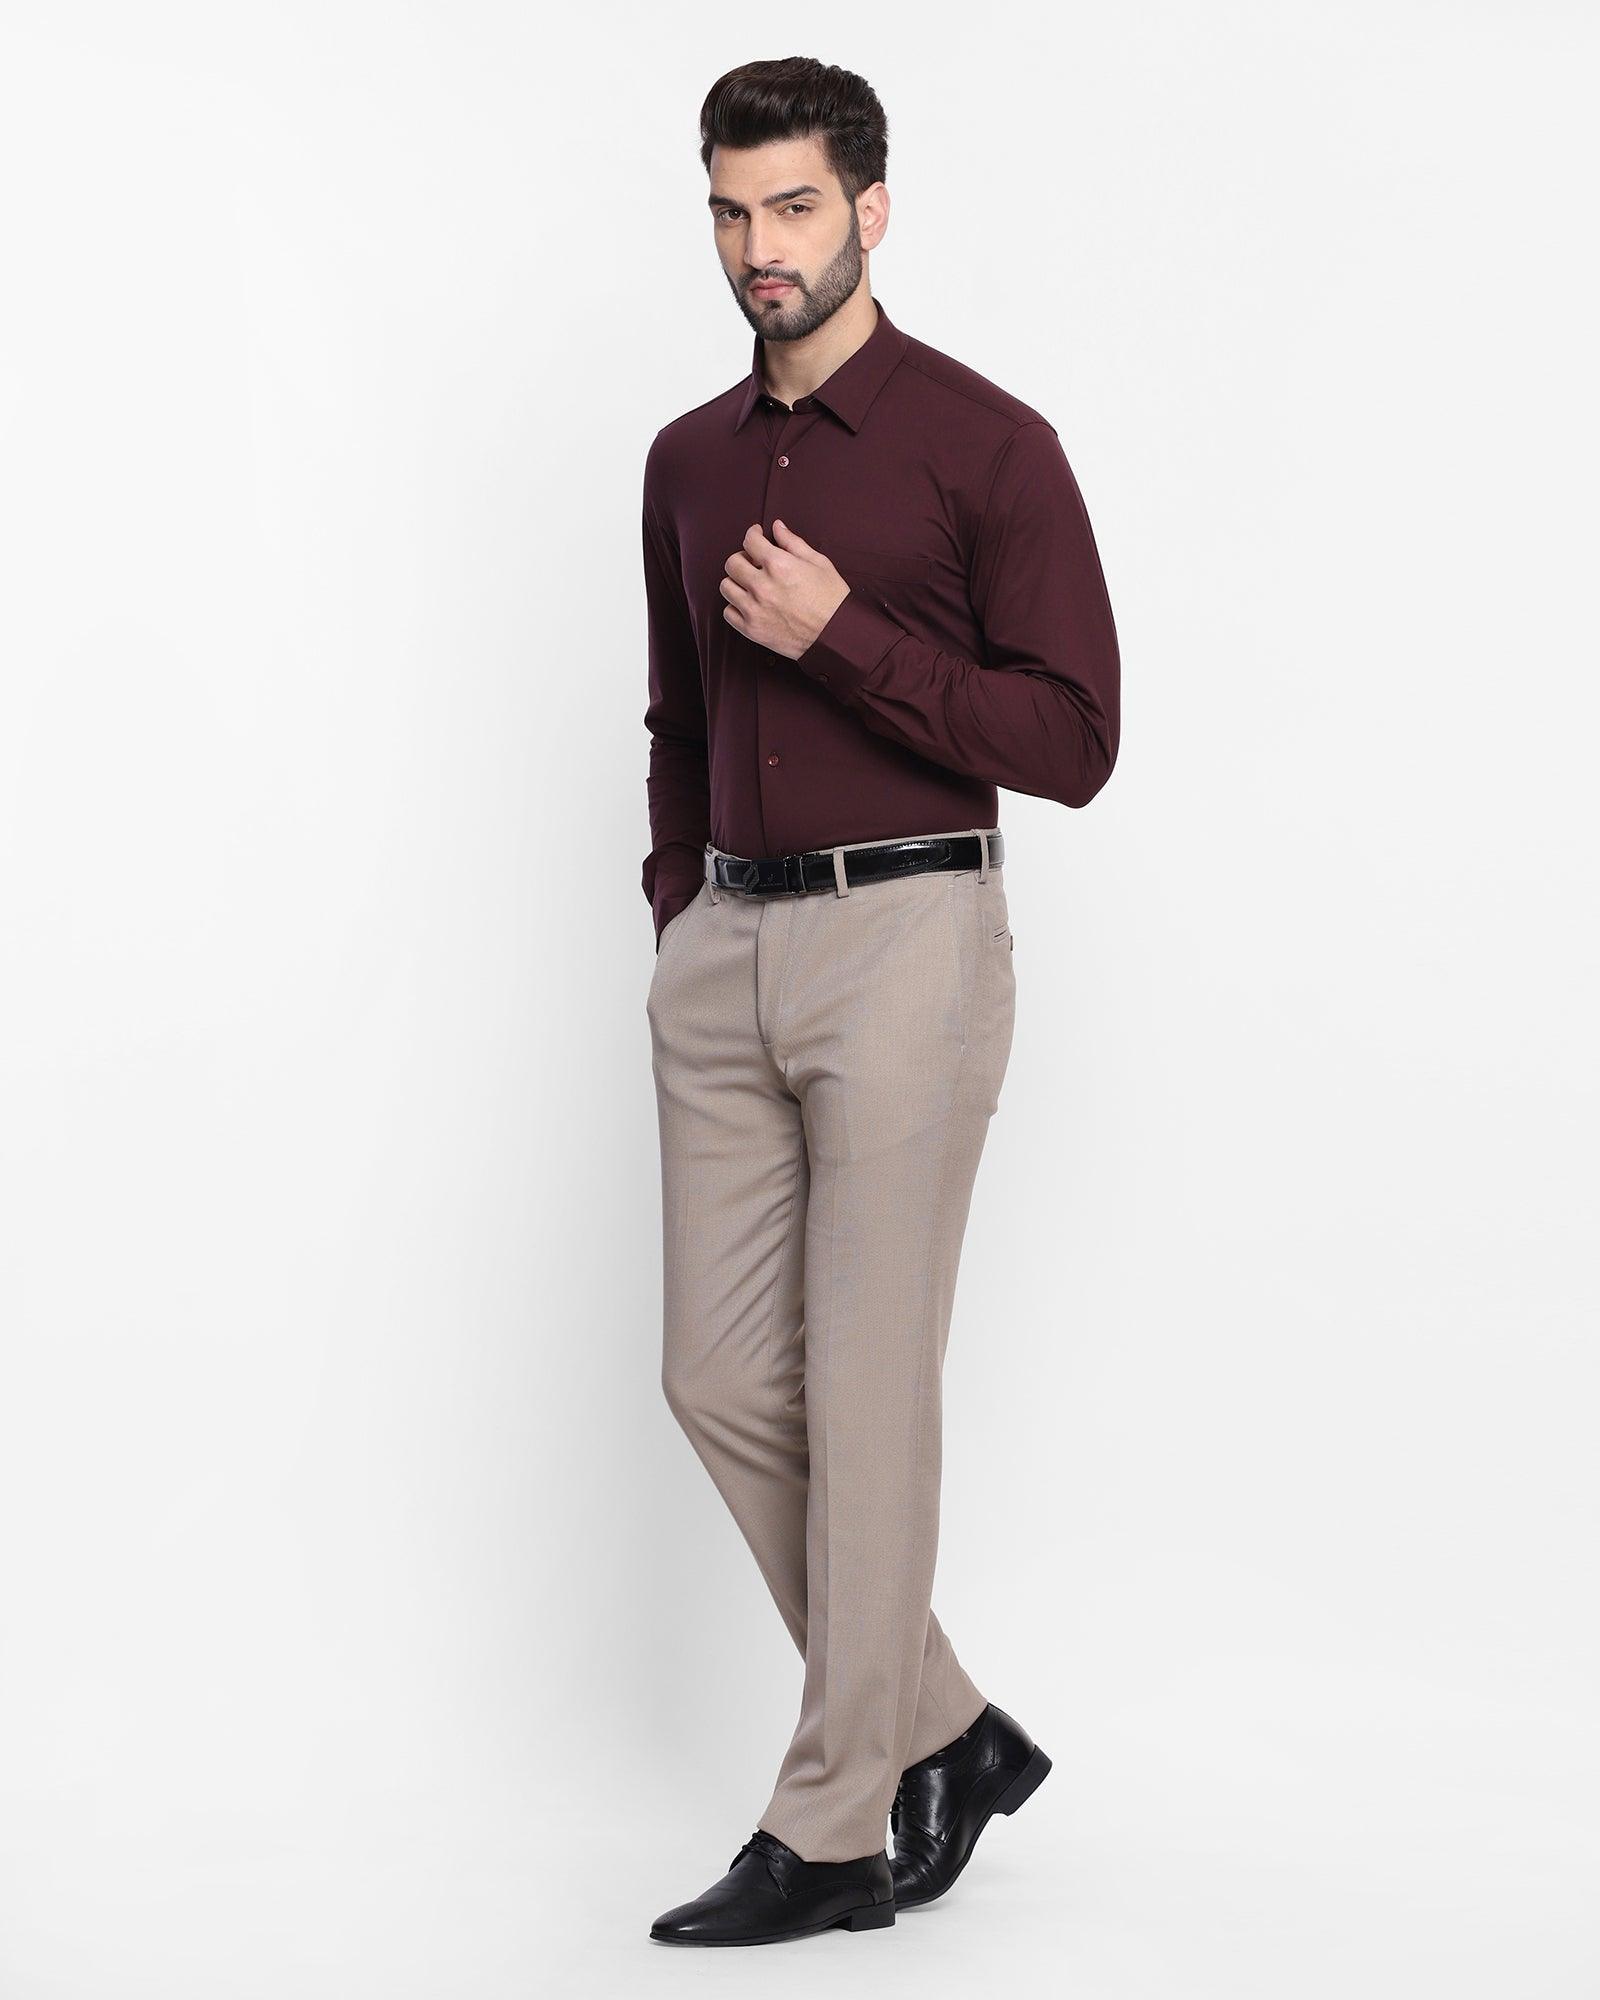 What Colour Shirts To Wear With Black Pants: 7 Foolproof Options